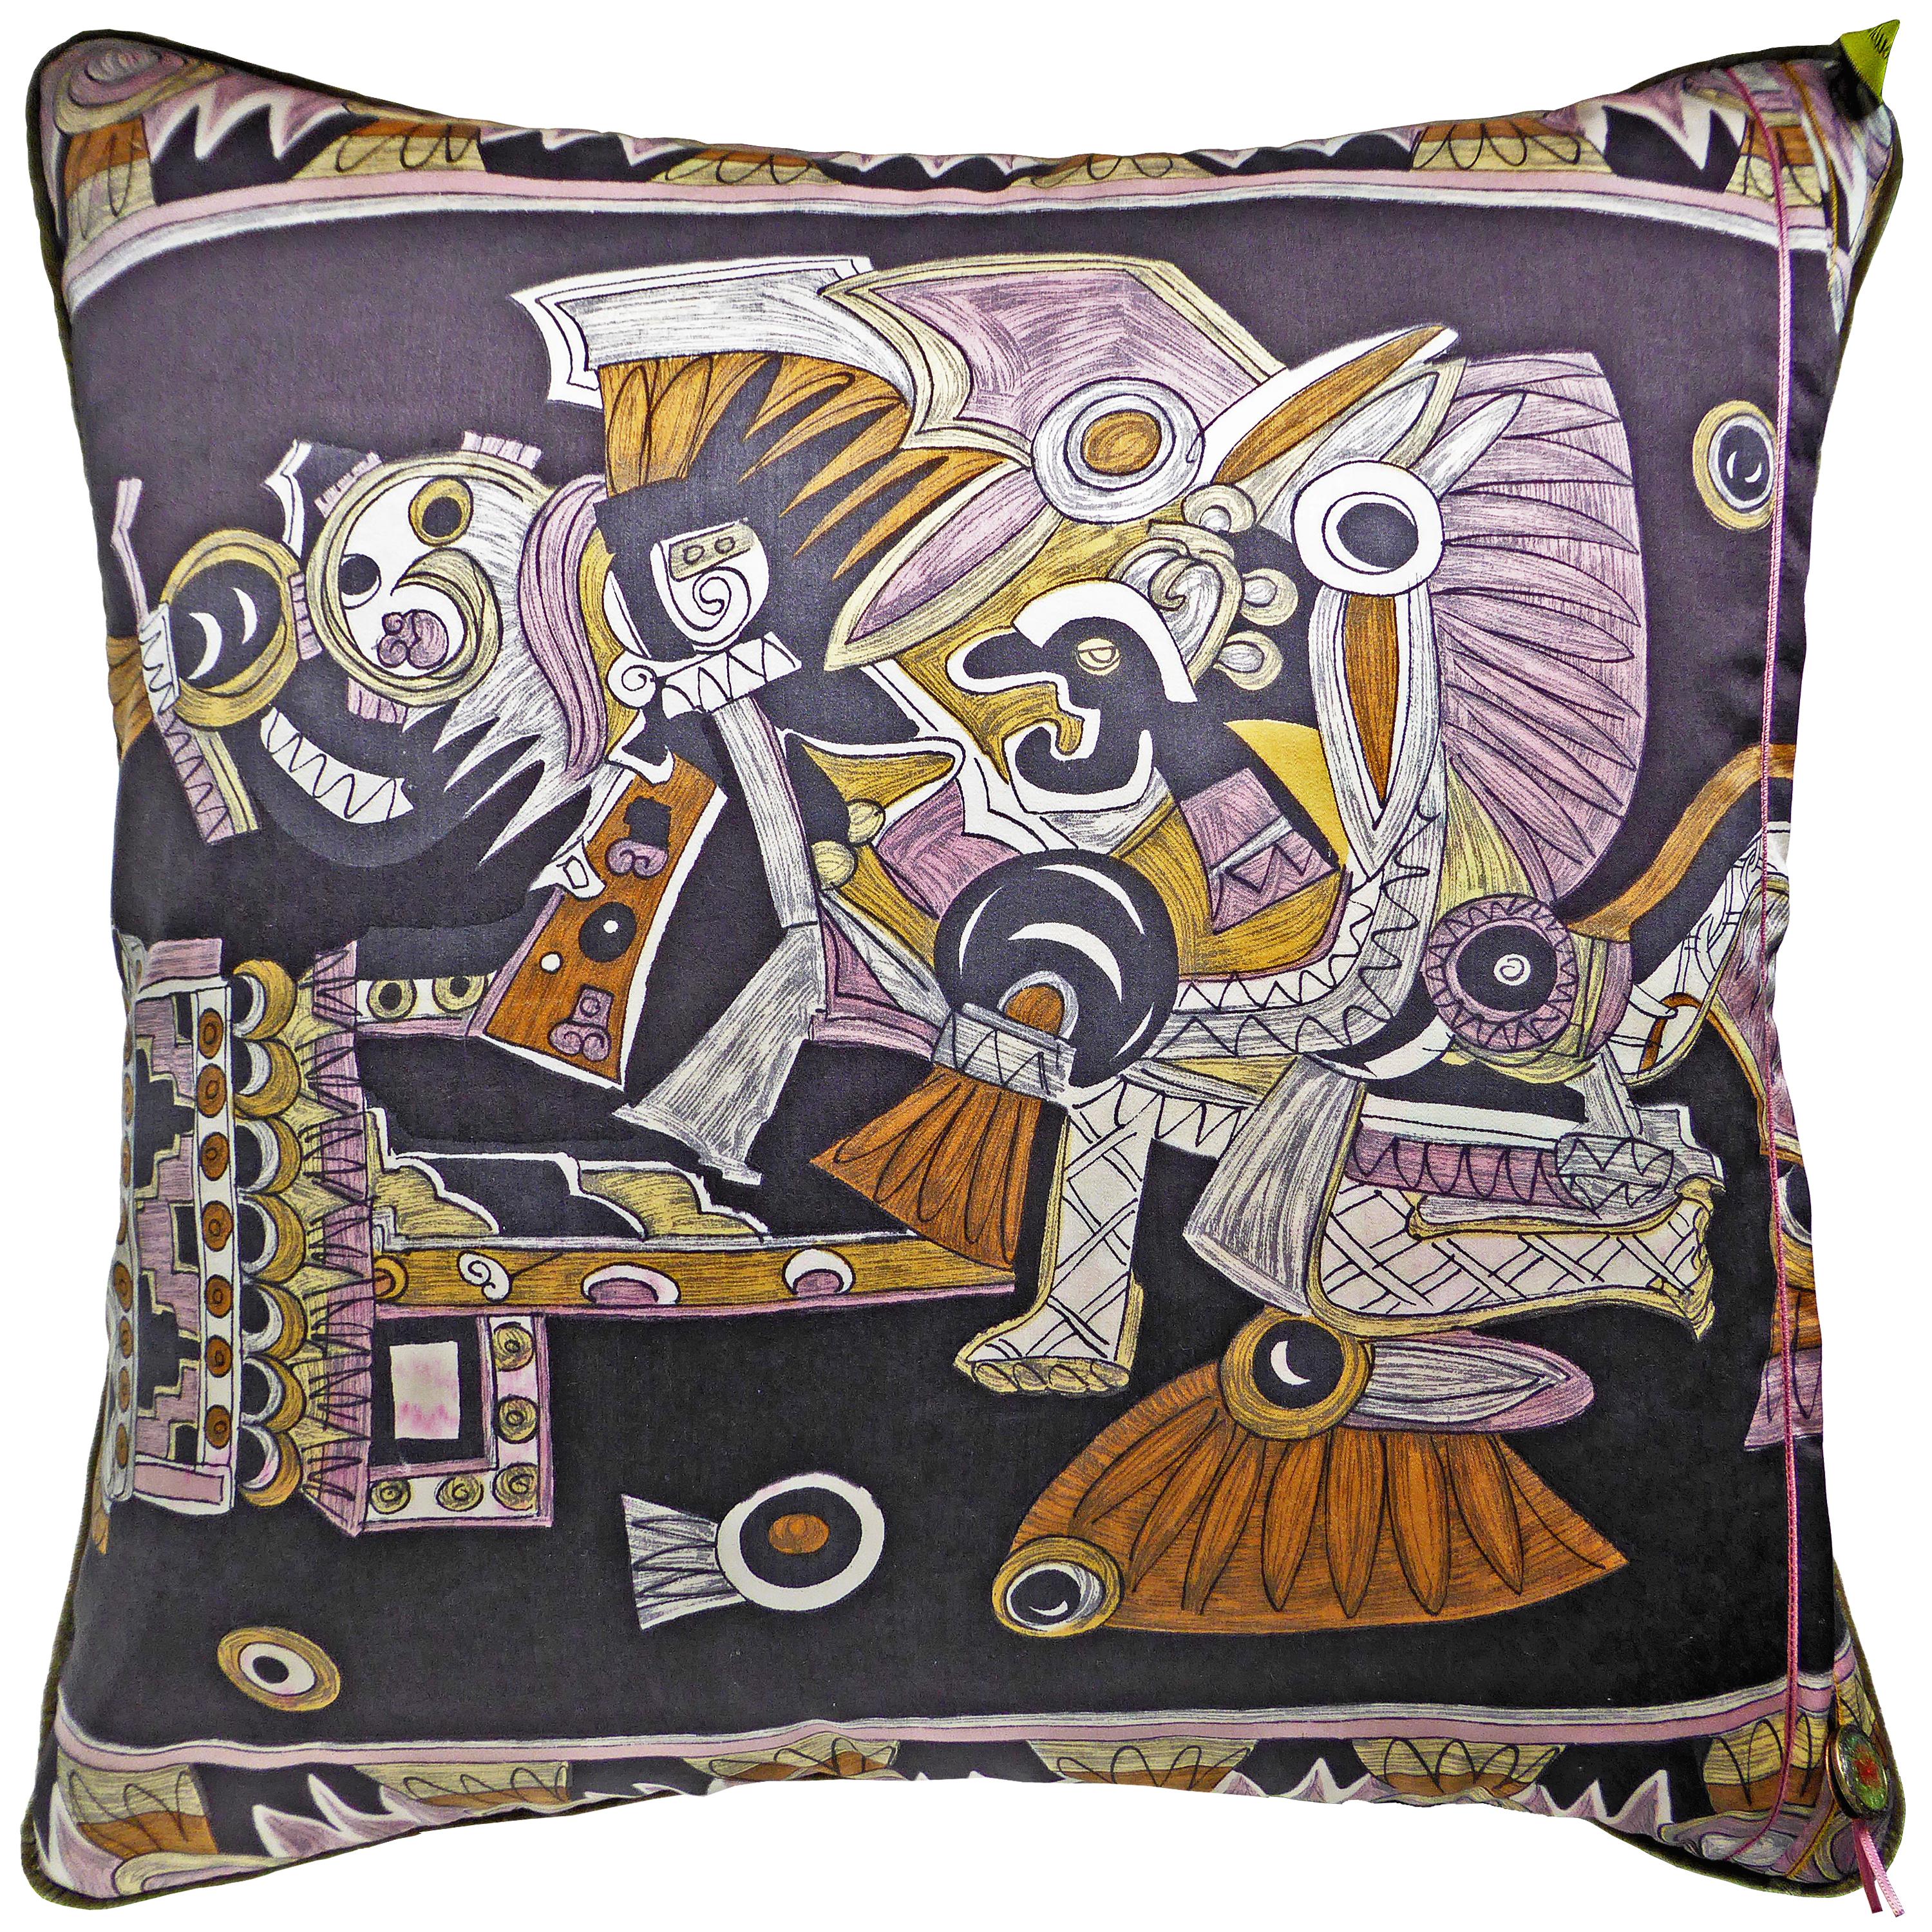 British Vintage Cushions, Luxury Silk Bespoke Pillow ‘Dove of Peace', Made in London